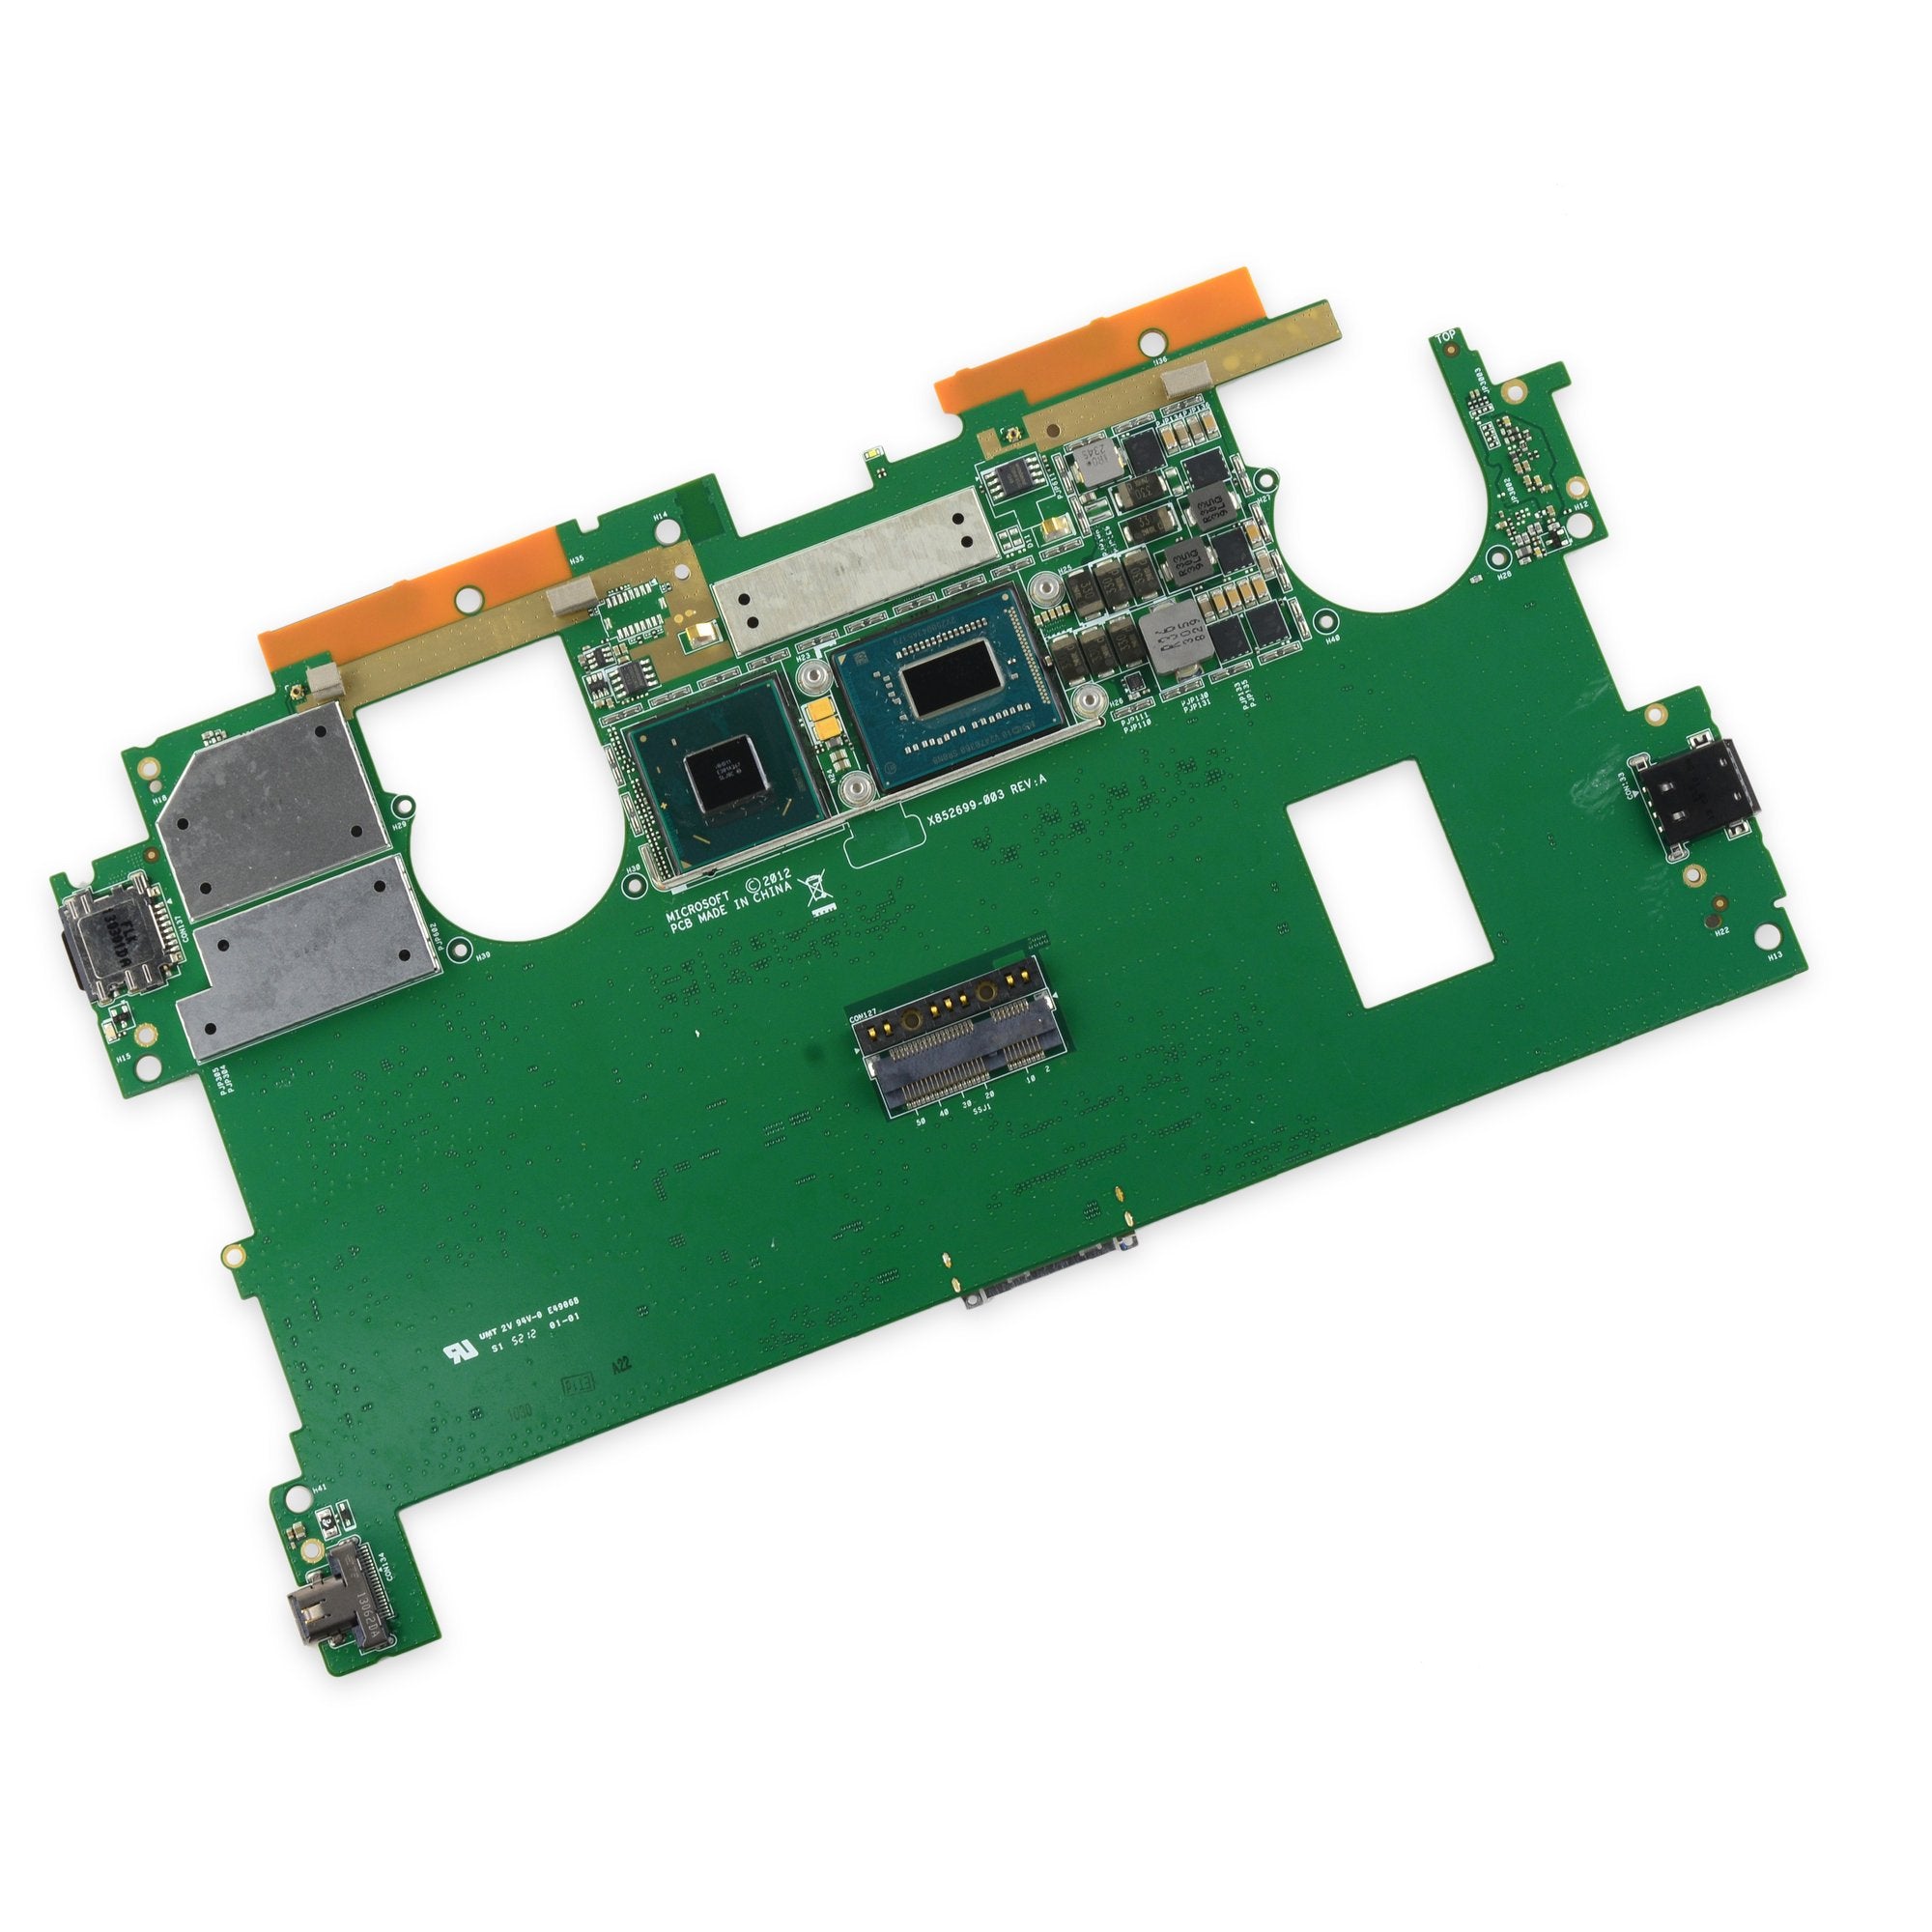 Surface Pro Motherboard